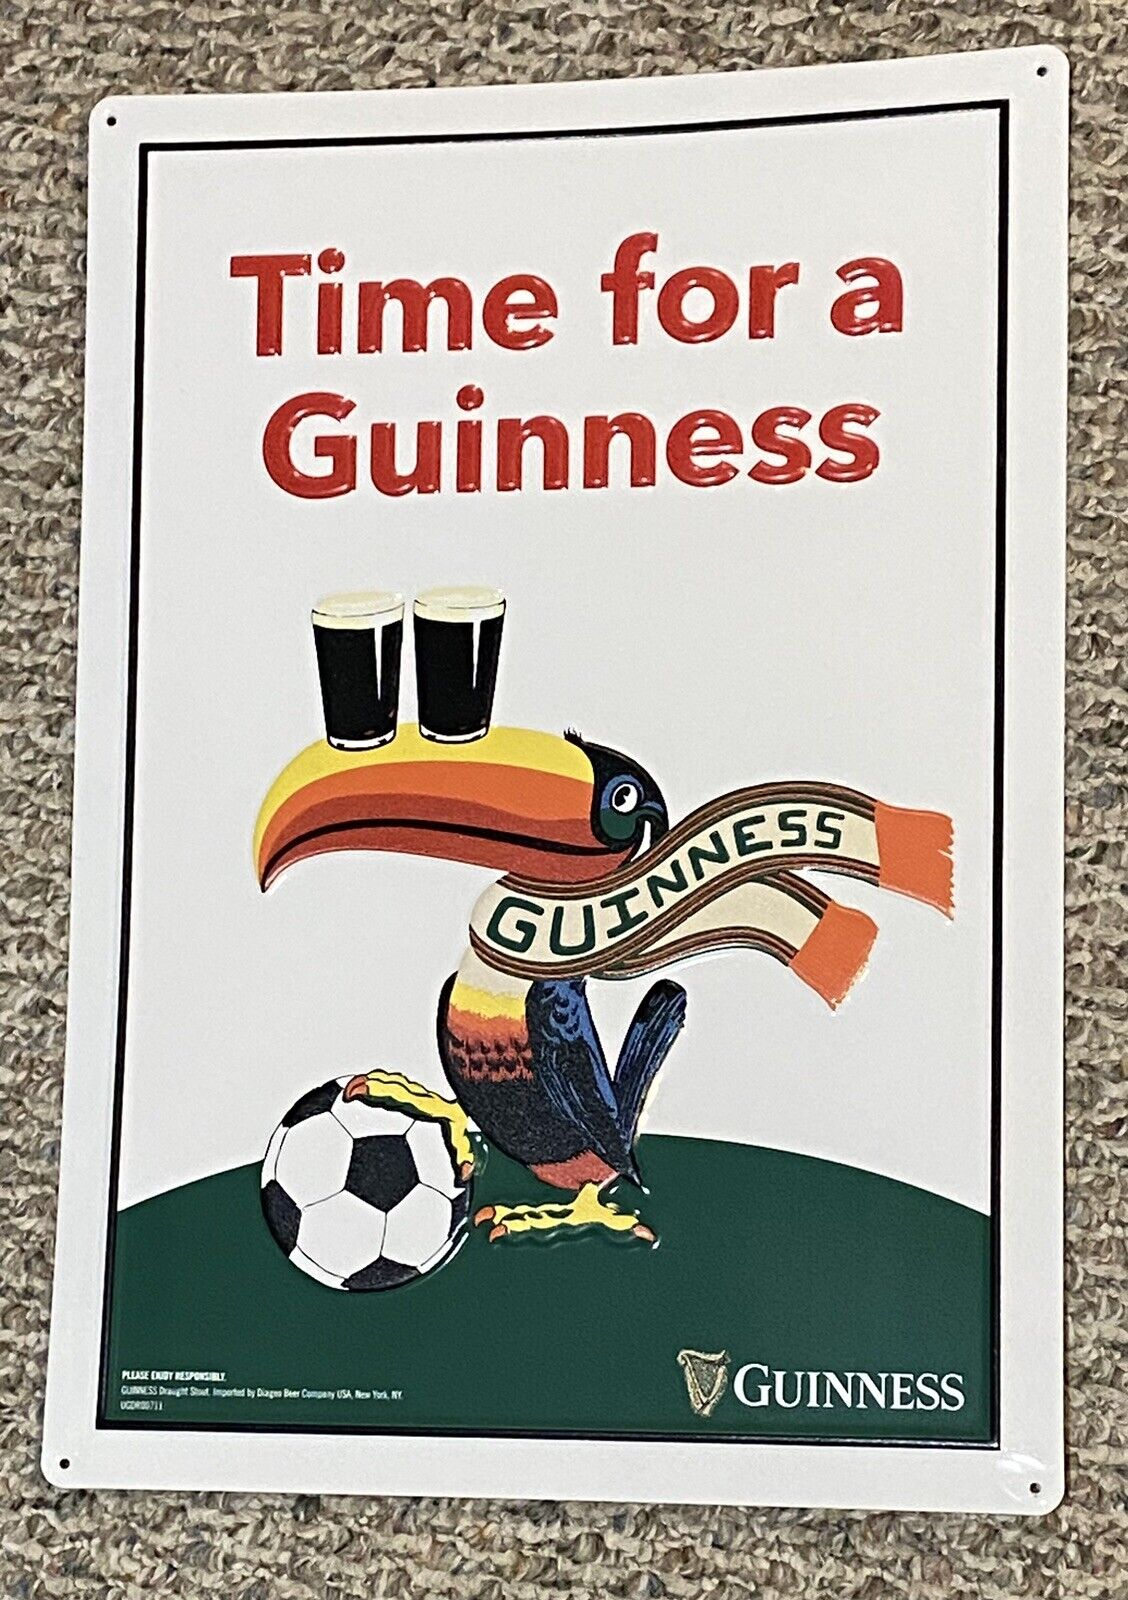 Guinness Beer Time for a Guinness Soccer Toucan Metal Sign Man Cave/Bar WAY COOL